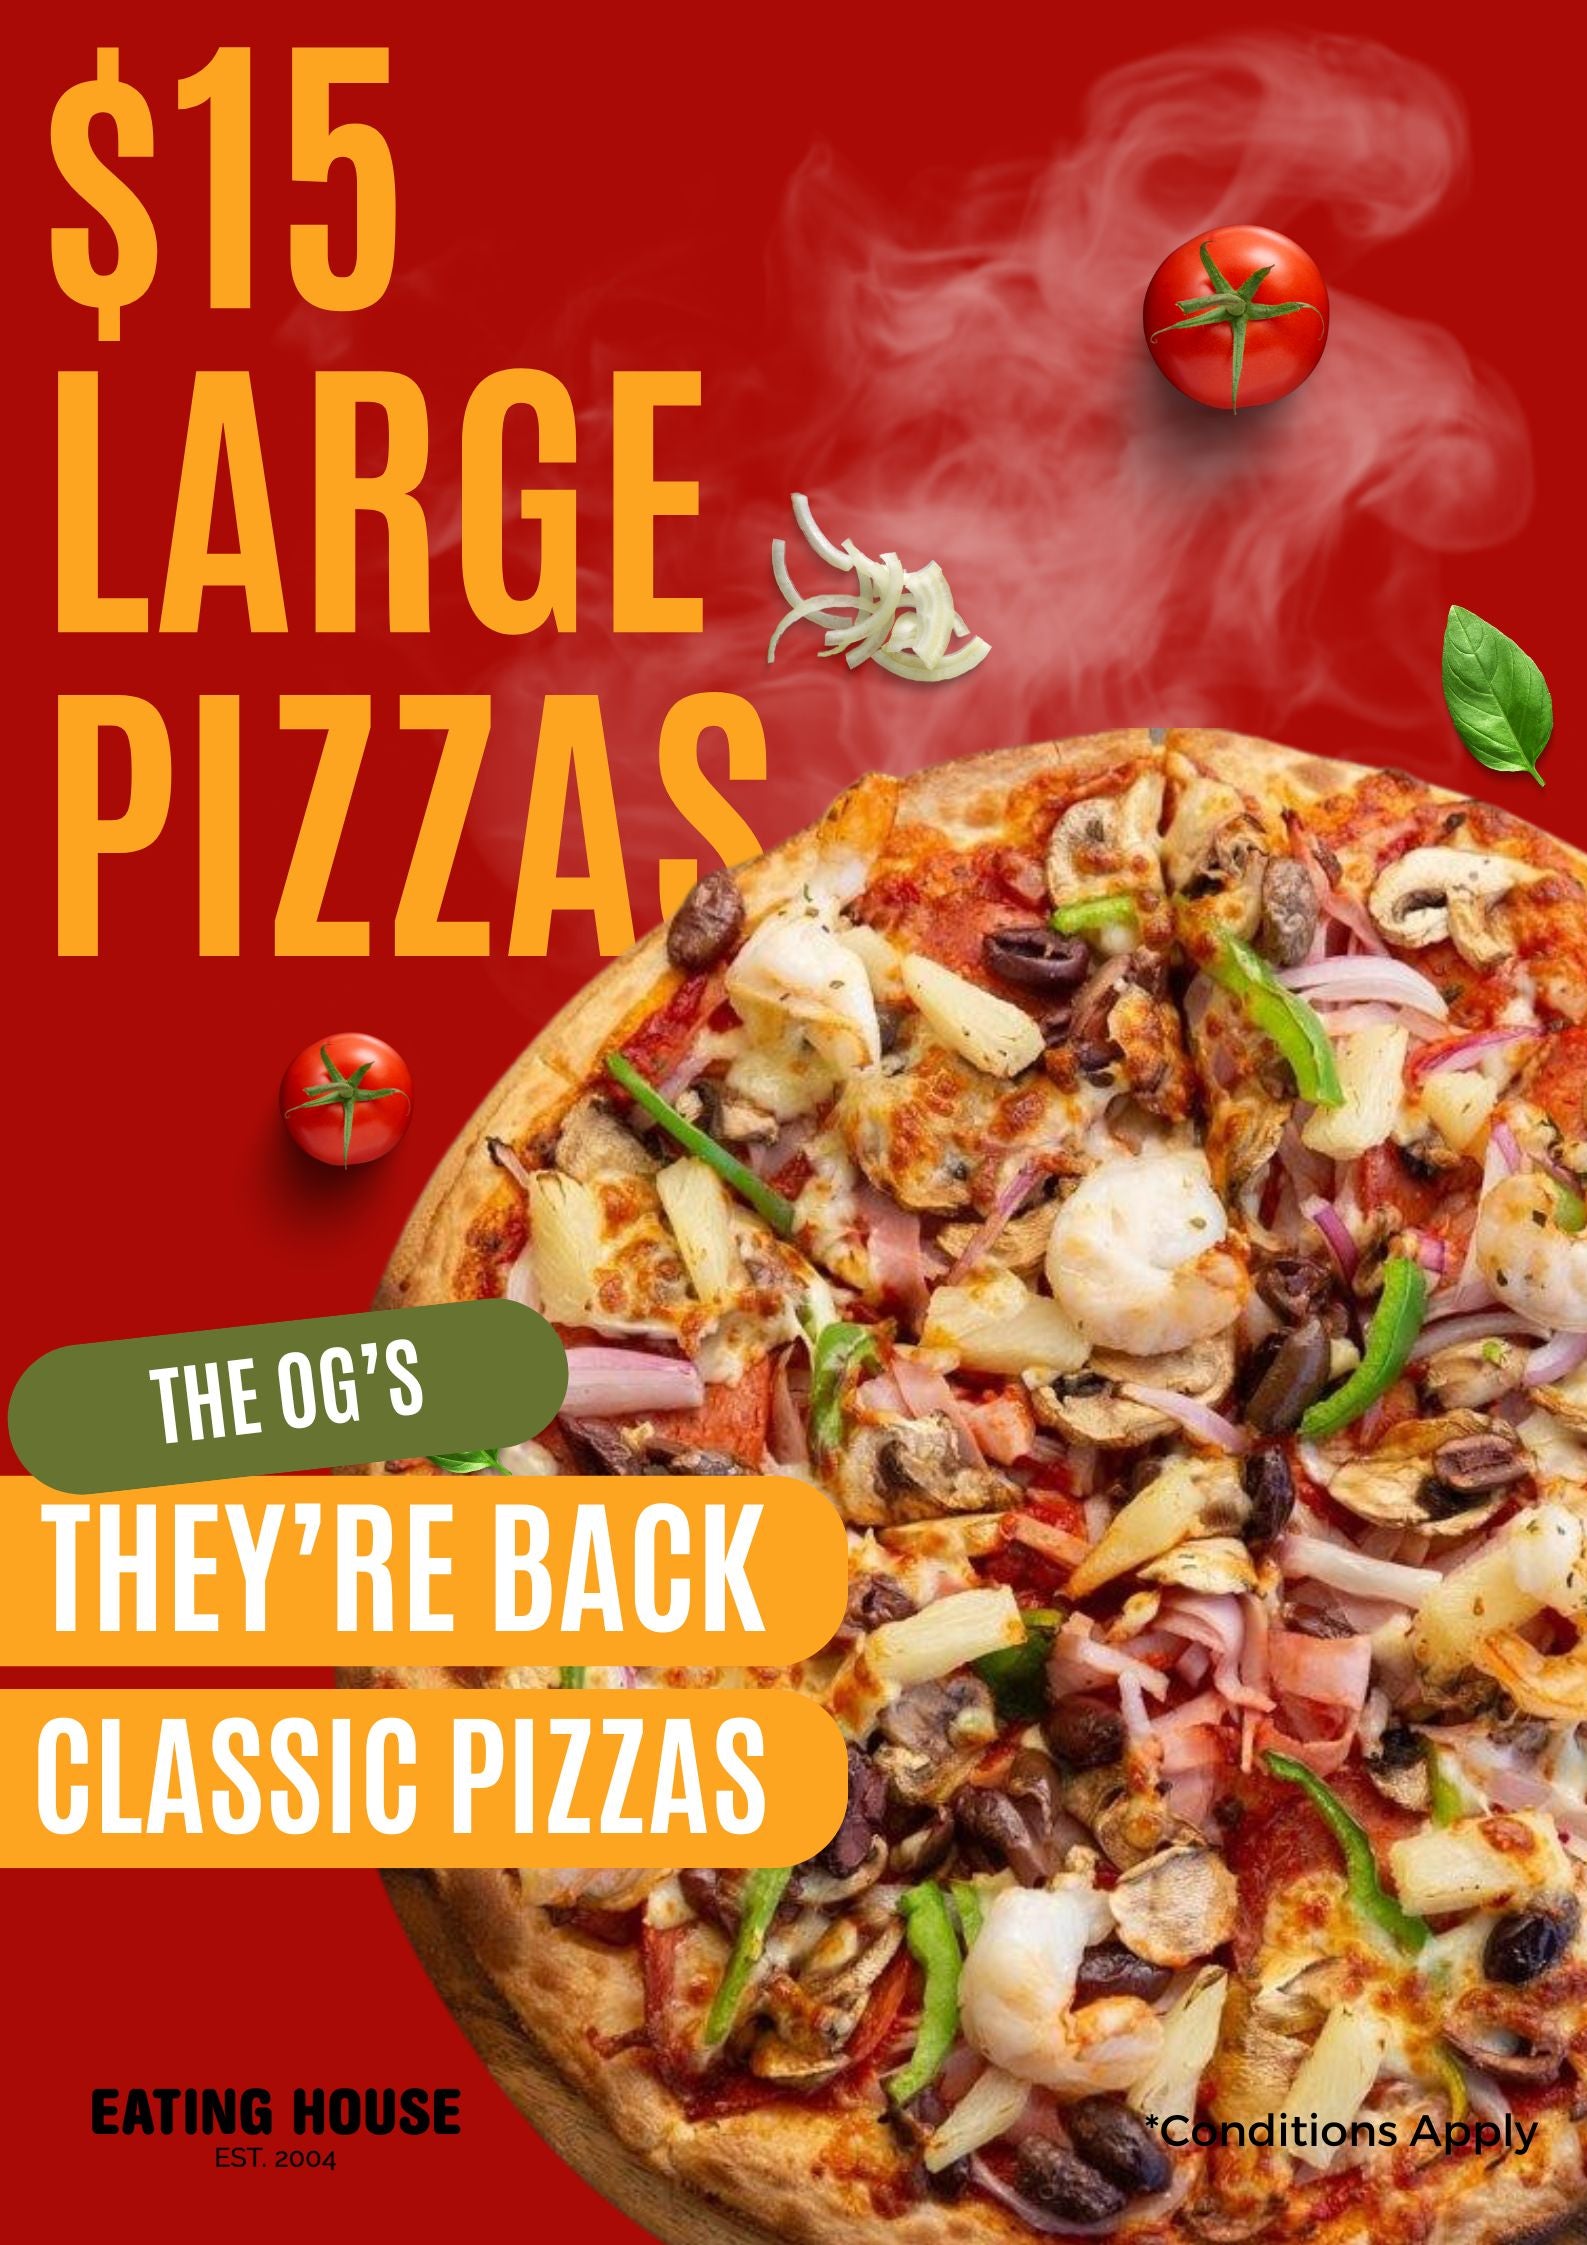 $15 LARGE PIZZA SPECIAL